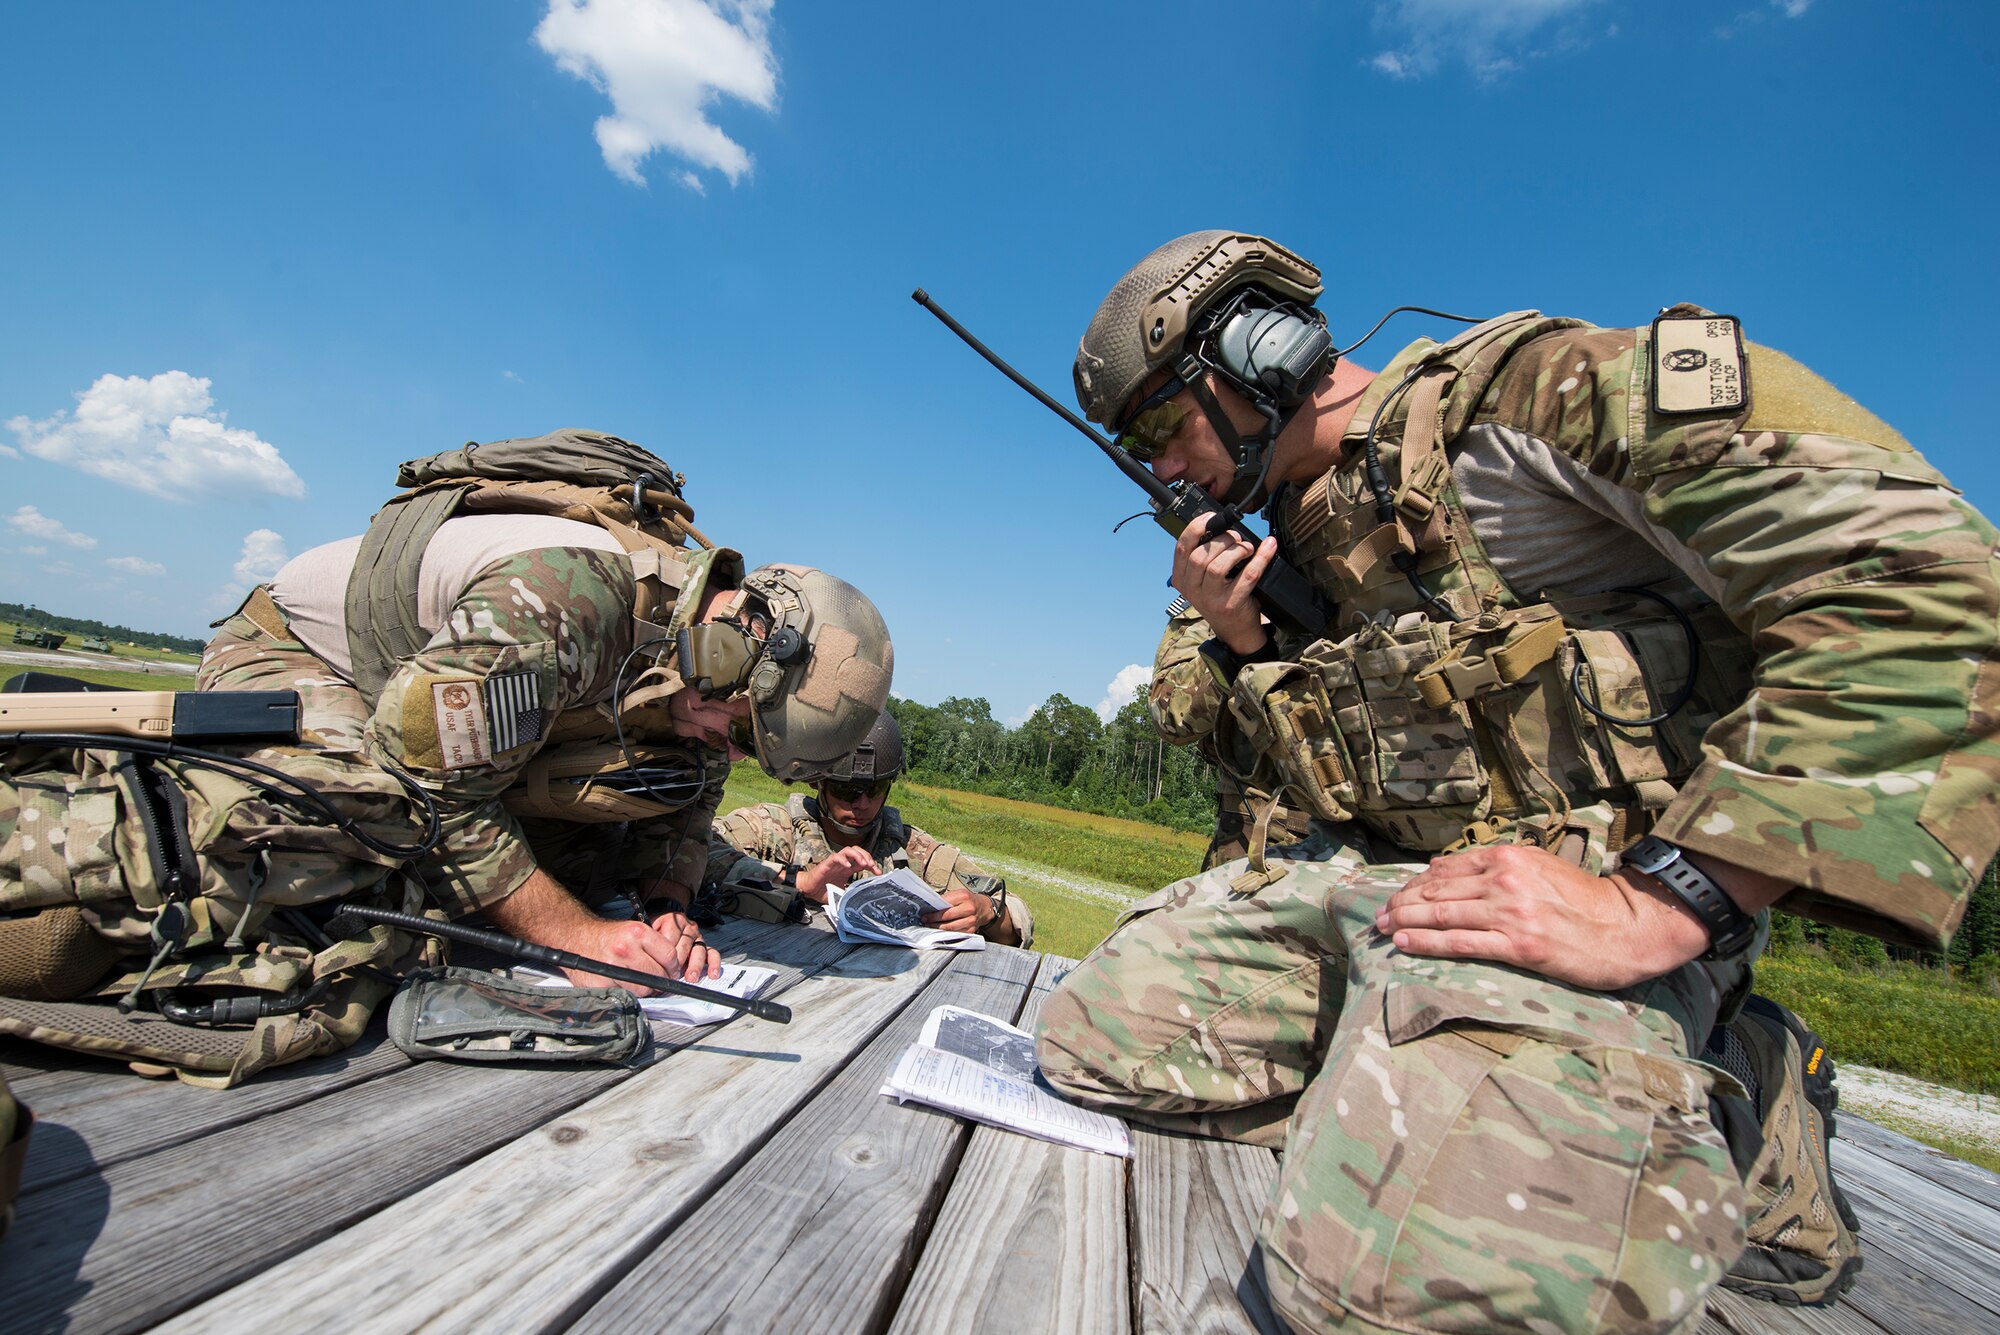 U.S. Air Force Tech. Sgt. Ron Tyson, 7th Air Support Operations Squadron tactical air control party, right, orders a strafe run while Staff Sgt. Tyler Puterbaugh, 7th ASOS TACP, finds the next target during a joint training June 18, 2015, on Grand Bay Bombing and Gunnery Range at Moody Air Force Base, Ga. The TACPs communicated target coordinates with the A-10C Thunderbolt pilots who performed strafe runs by firing .50-caliber rounds at the confirmed targets. The 74th FS and 7th ASOS formed a sister squadron close air support team and have trained together during IRON STRIKE and HUSTLER THUNDER. (U.S. Air Force photo by Airman 1st Class Ceaira Tinsley/Released)